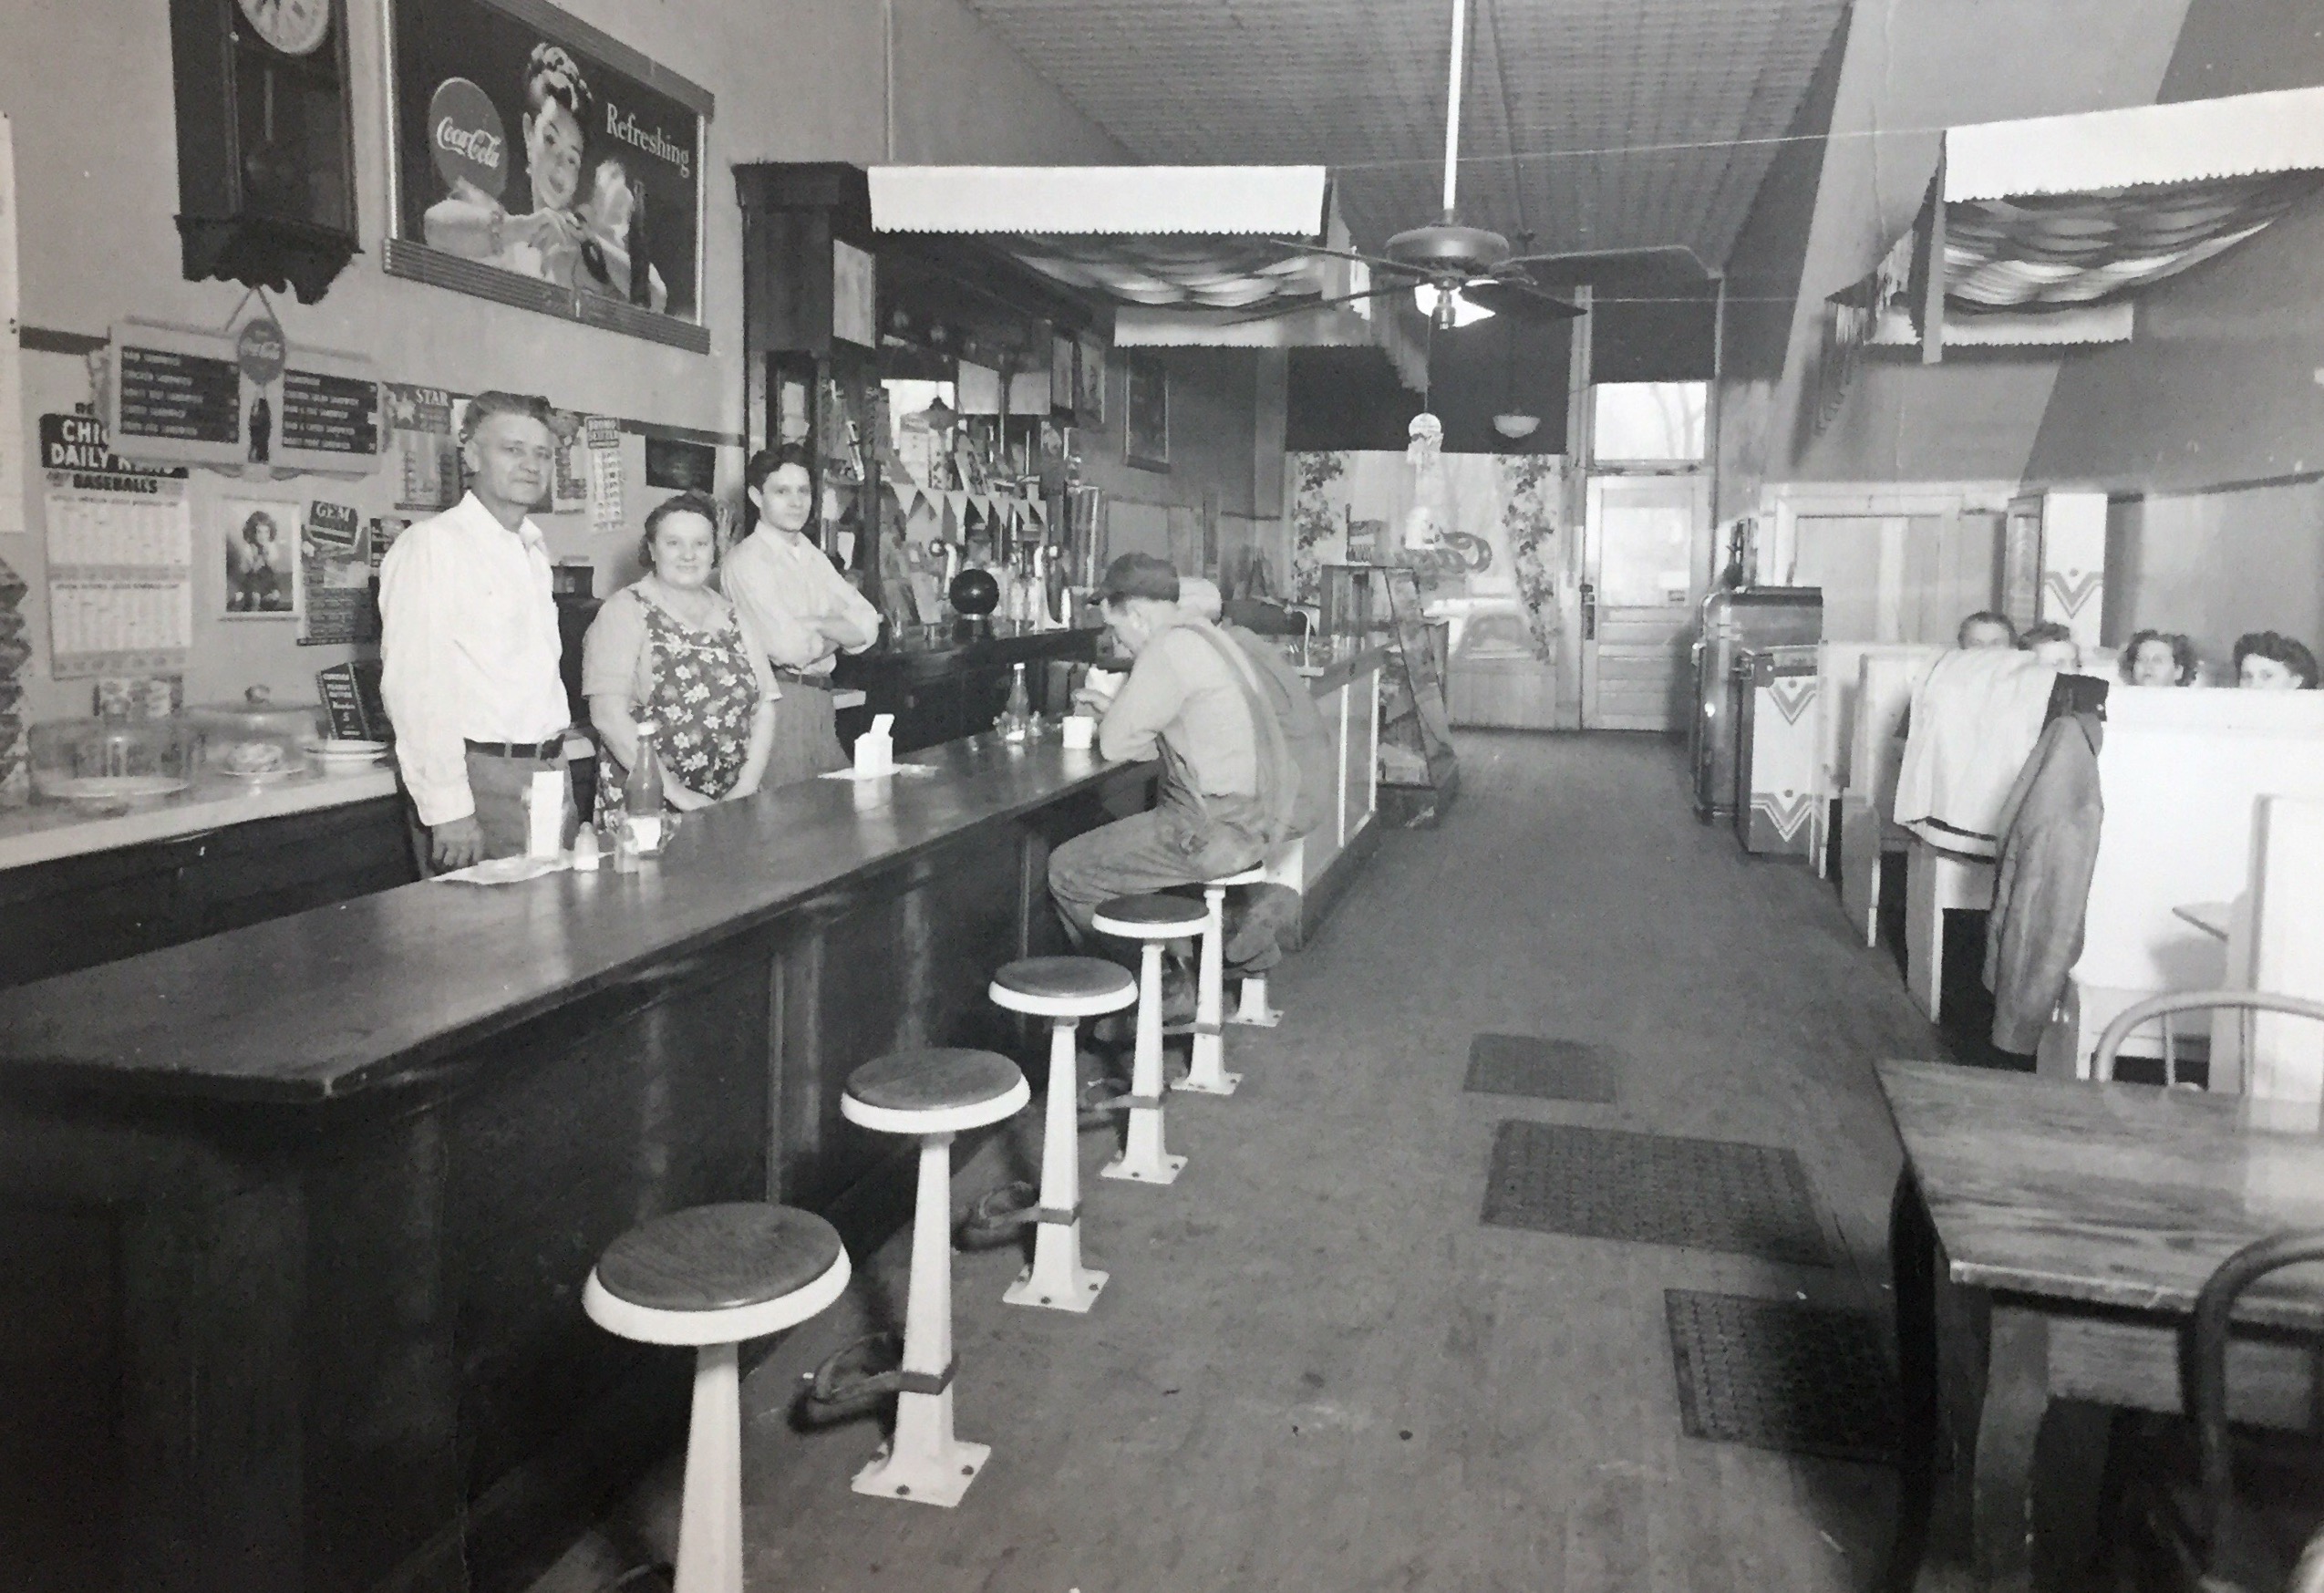 Grandpa and Grandma Bradley behind the counter in their diner. Uncle Pete behind them. Around 1950.